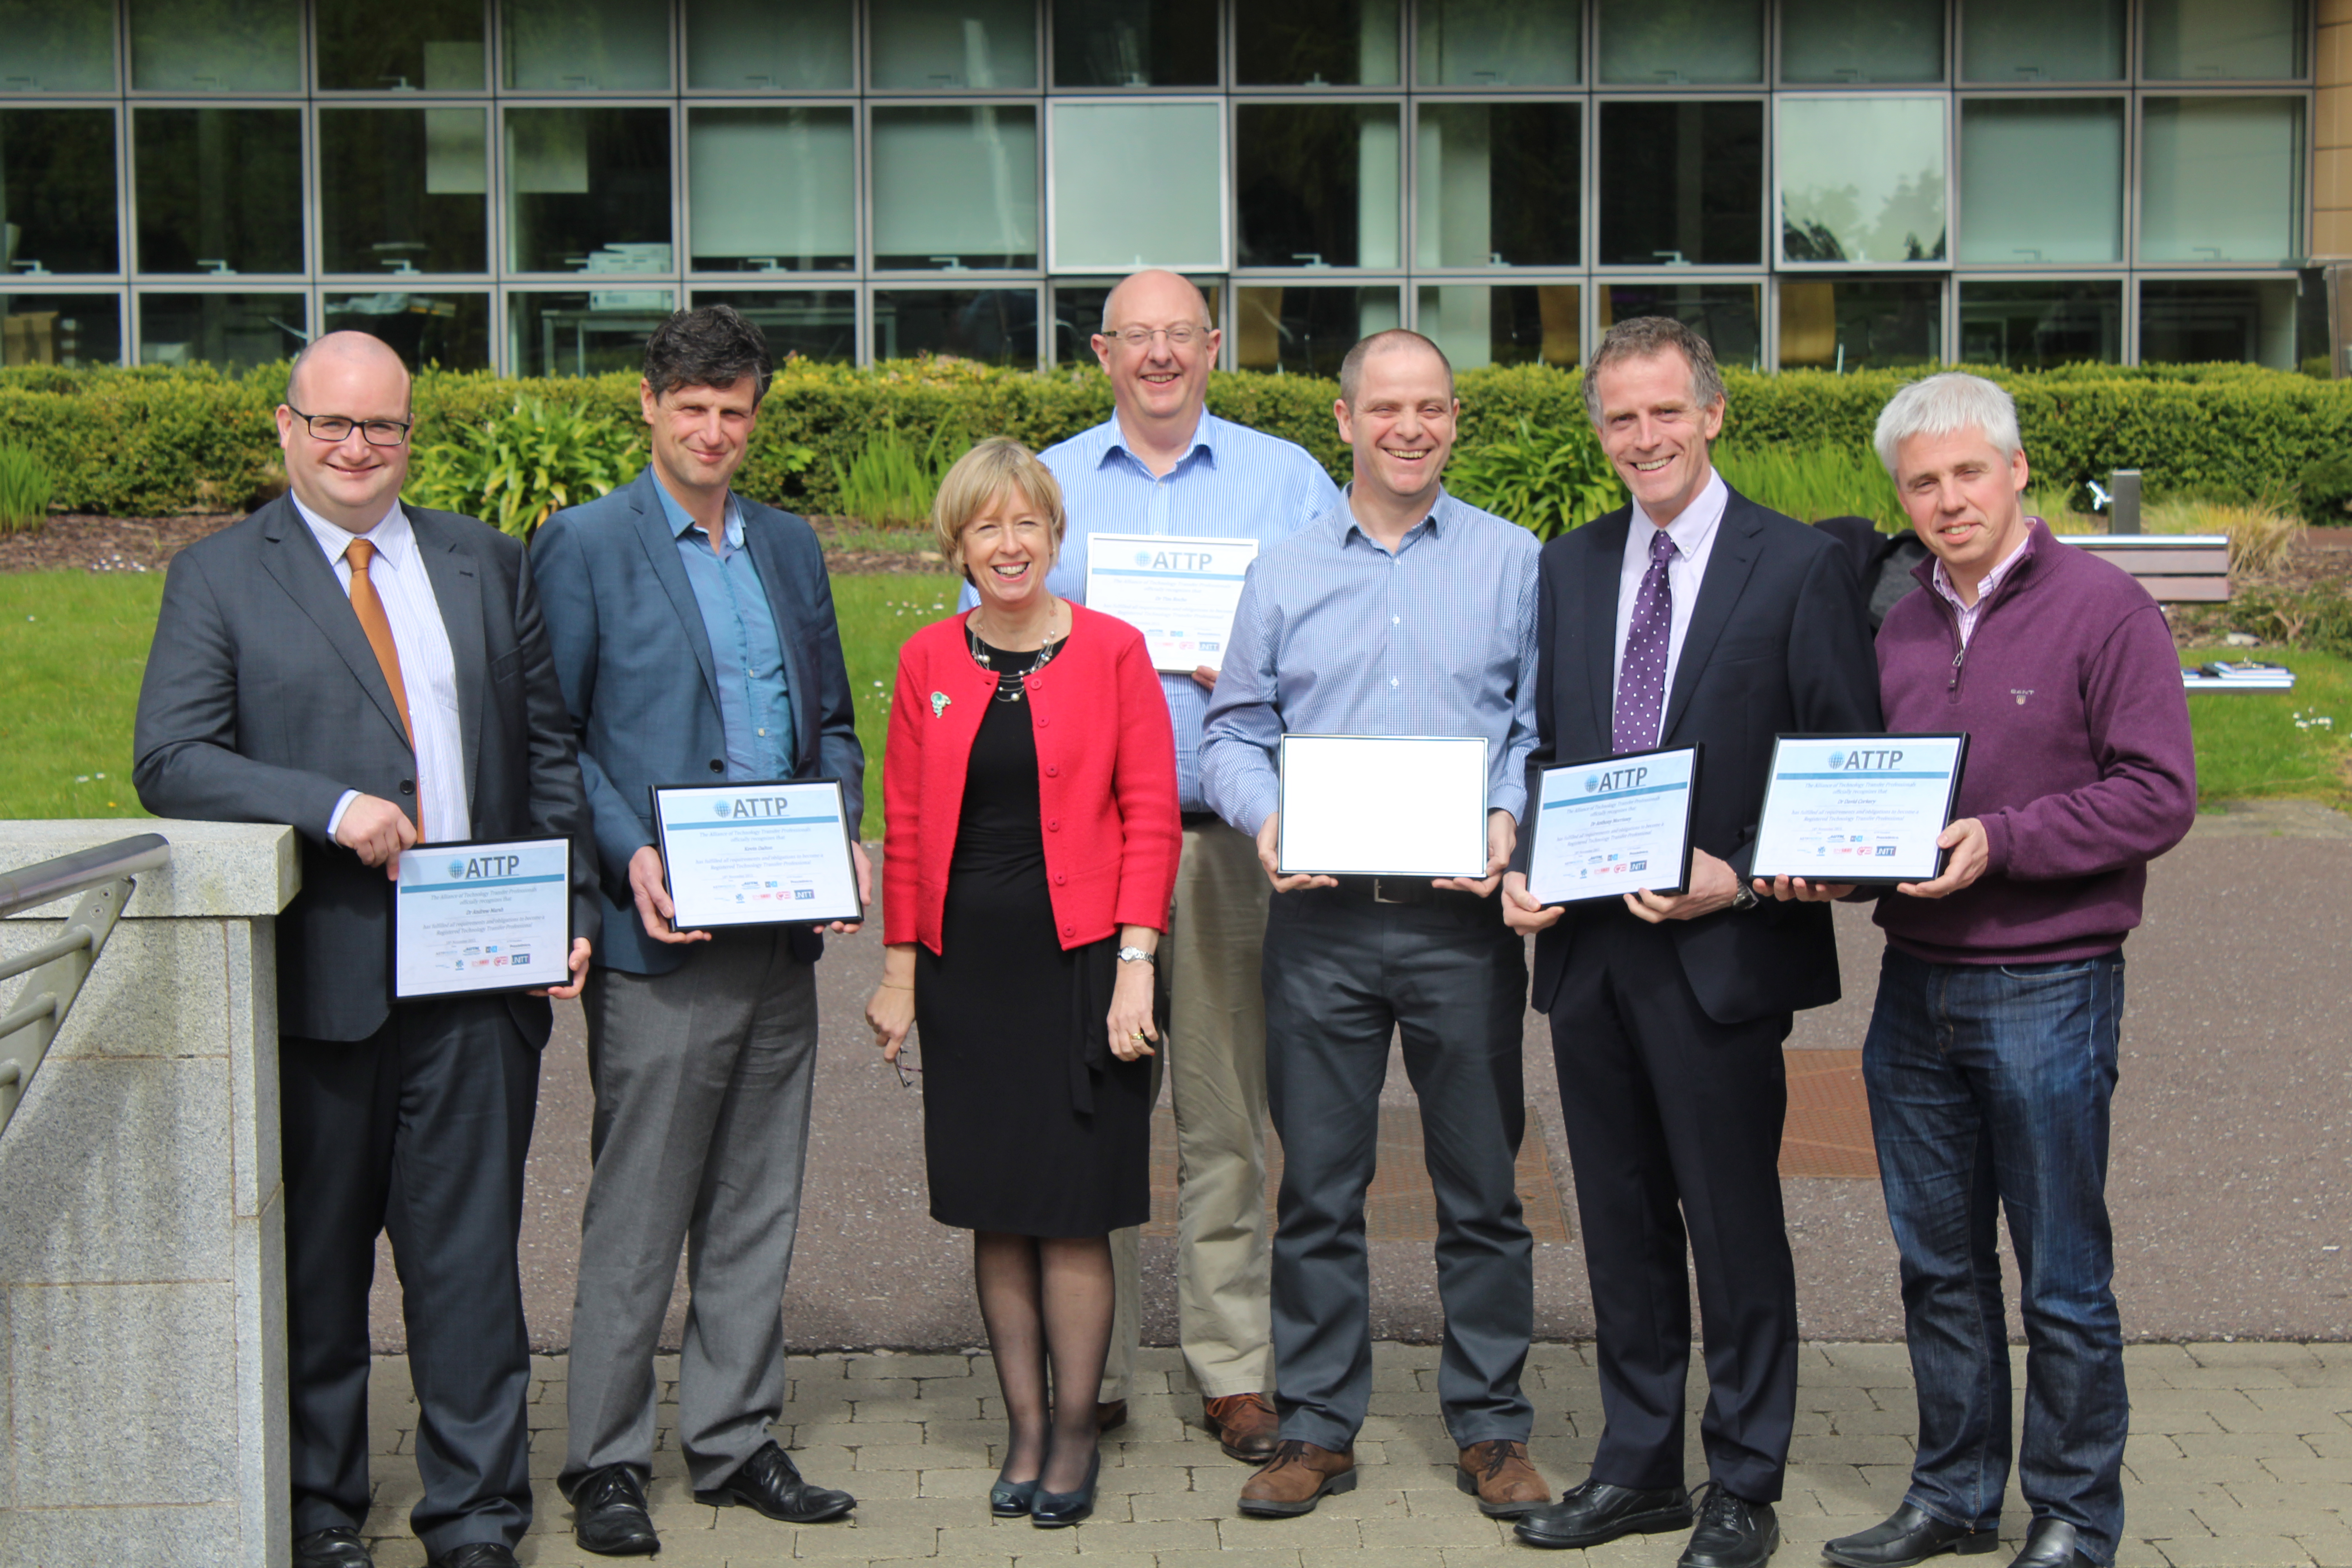 UCC congratulated by KTI Director, Dr Alison Campbell, for achieving international accreditation